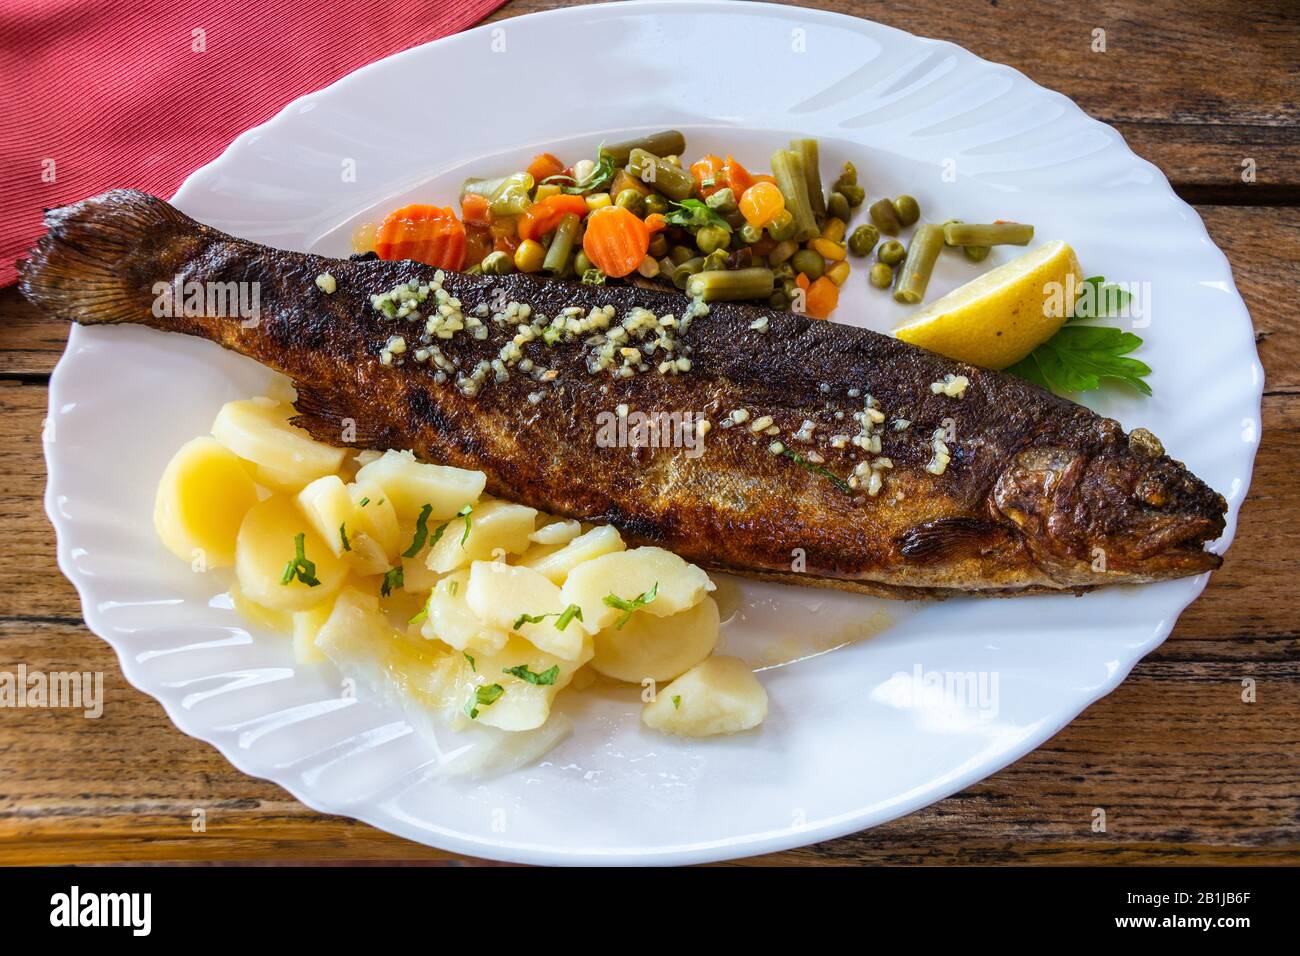 Plate of Bohinj trout with boiled potatoes and salad in Slovenia. Stock Photo